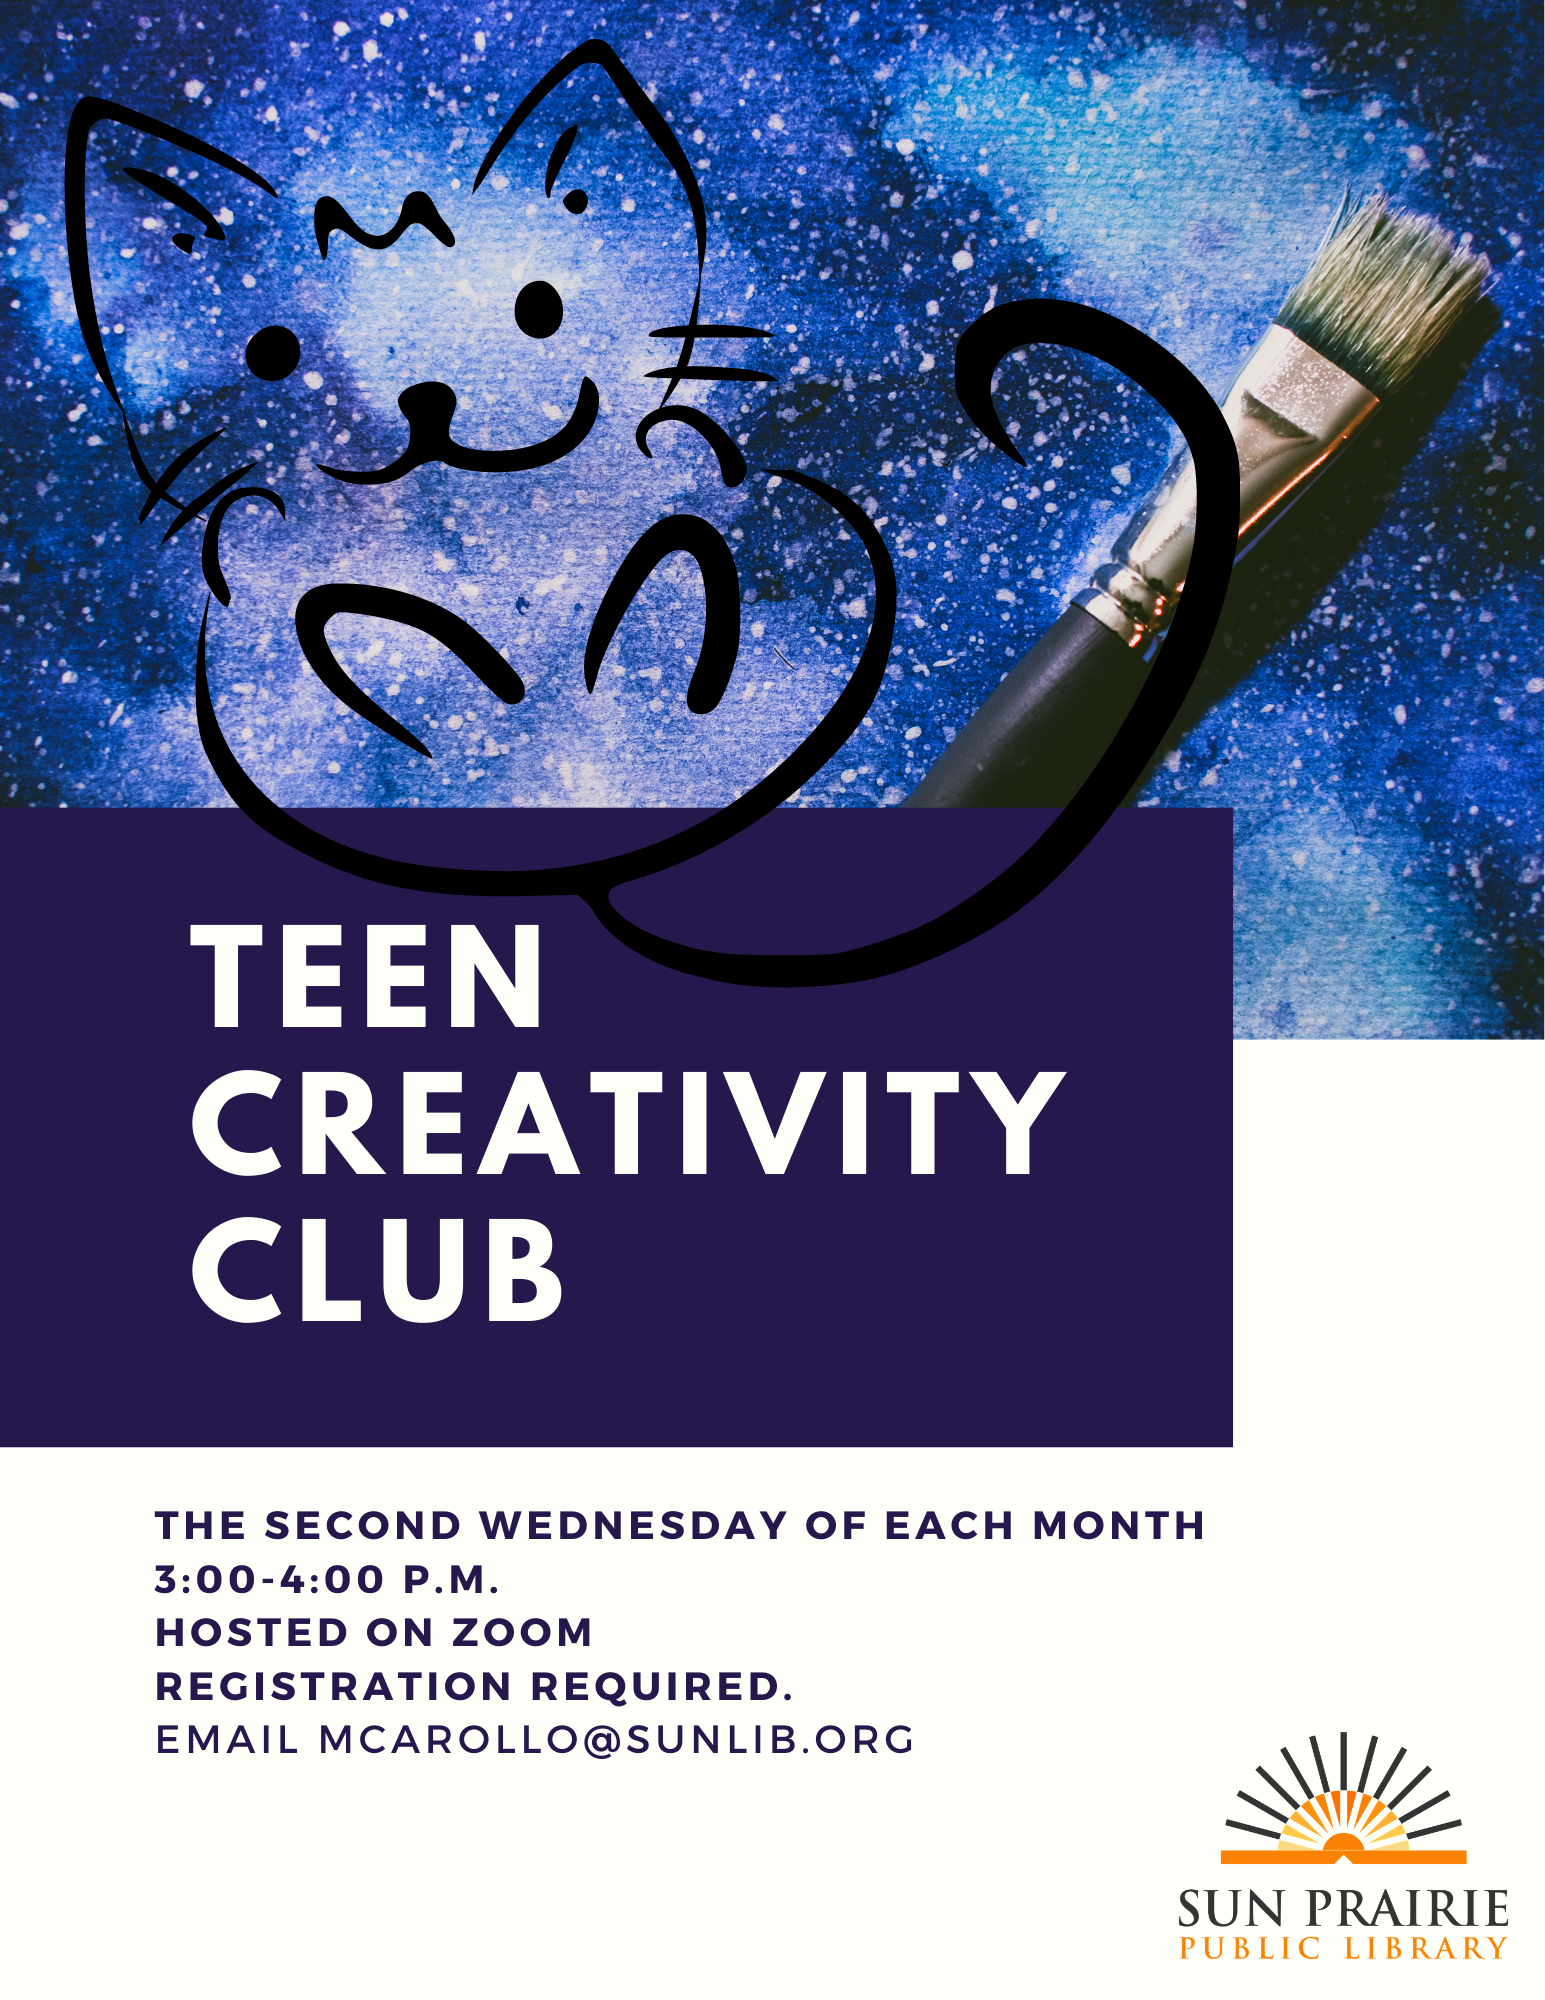 image of a cat and a paint brush advertising teen creativity club.